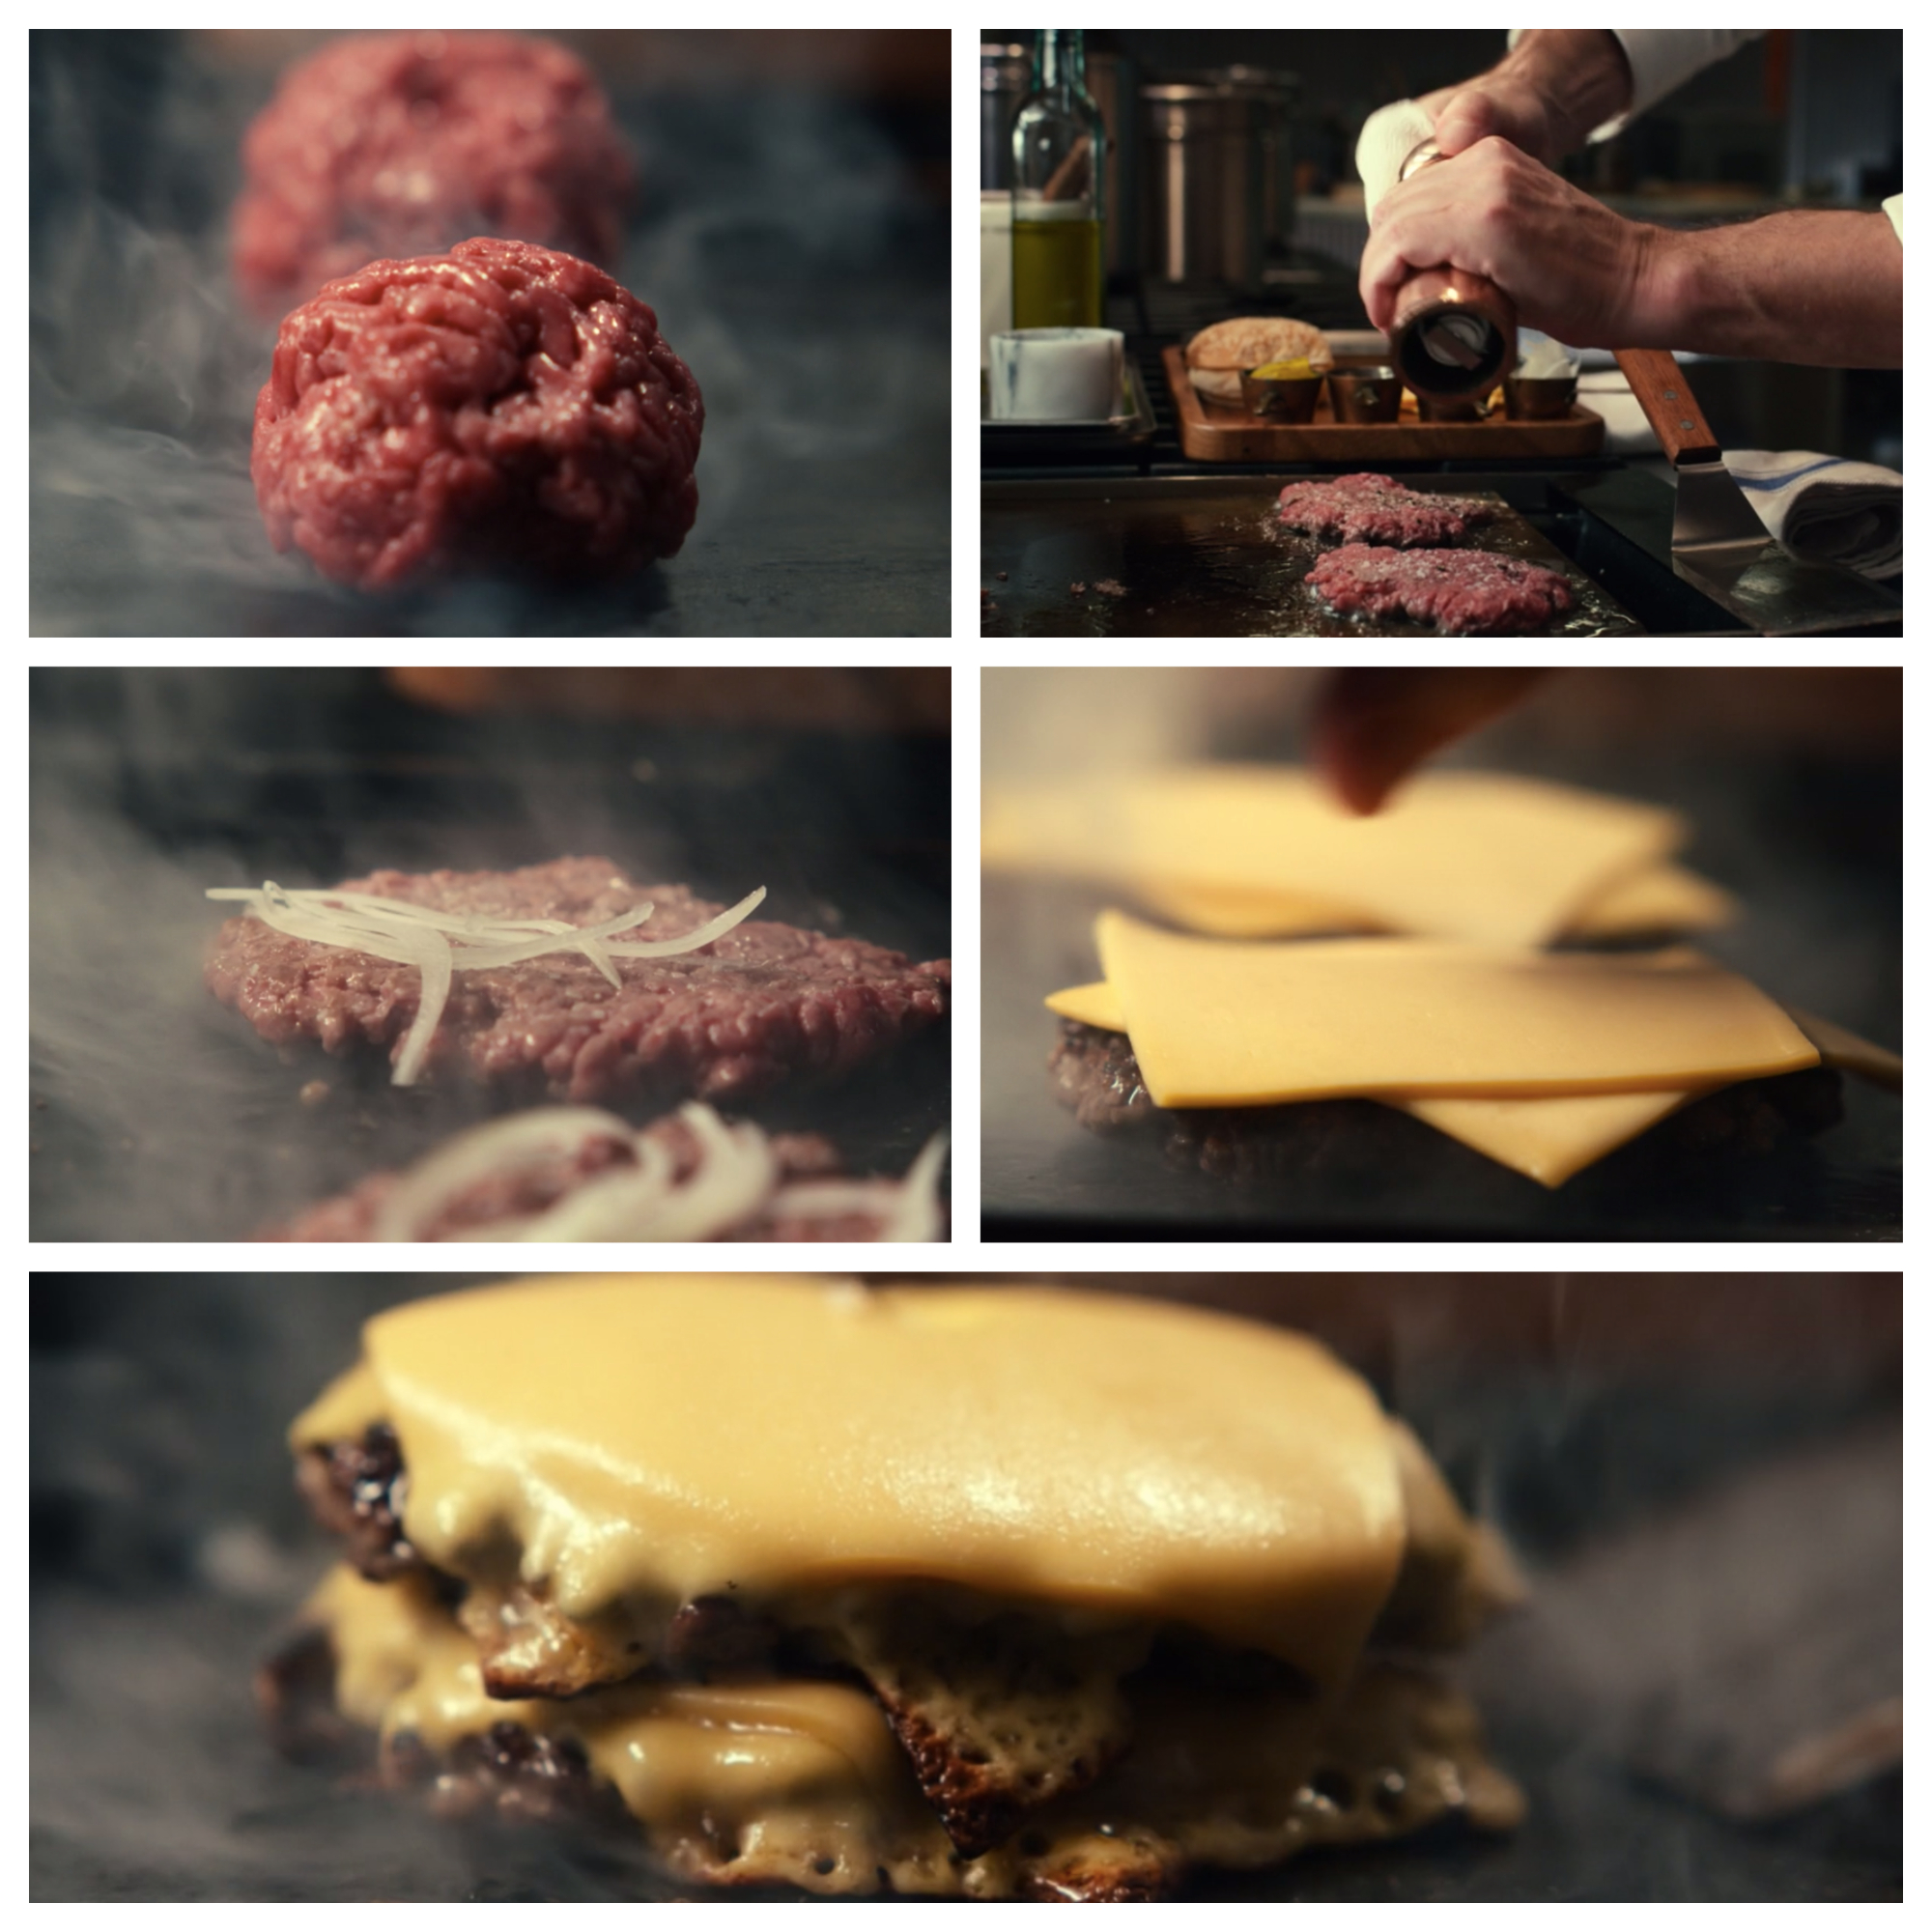 We Re-Created The Cheeseburger From ‘The Menu’ — Here’s Our Recipe